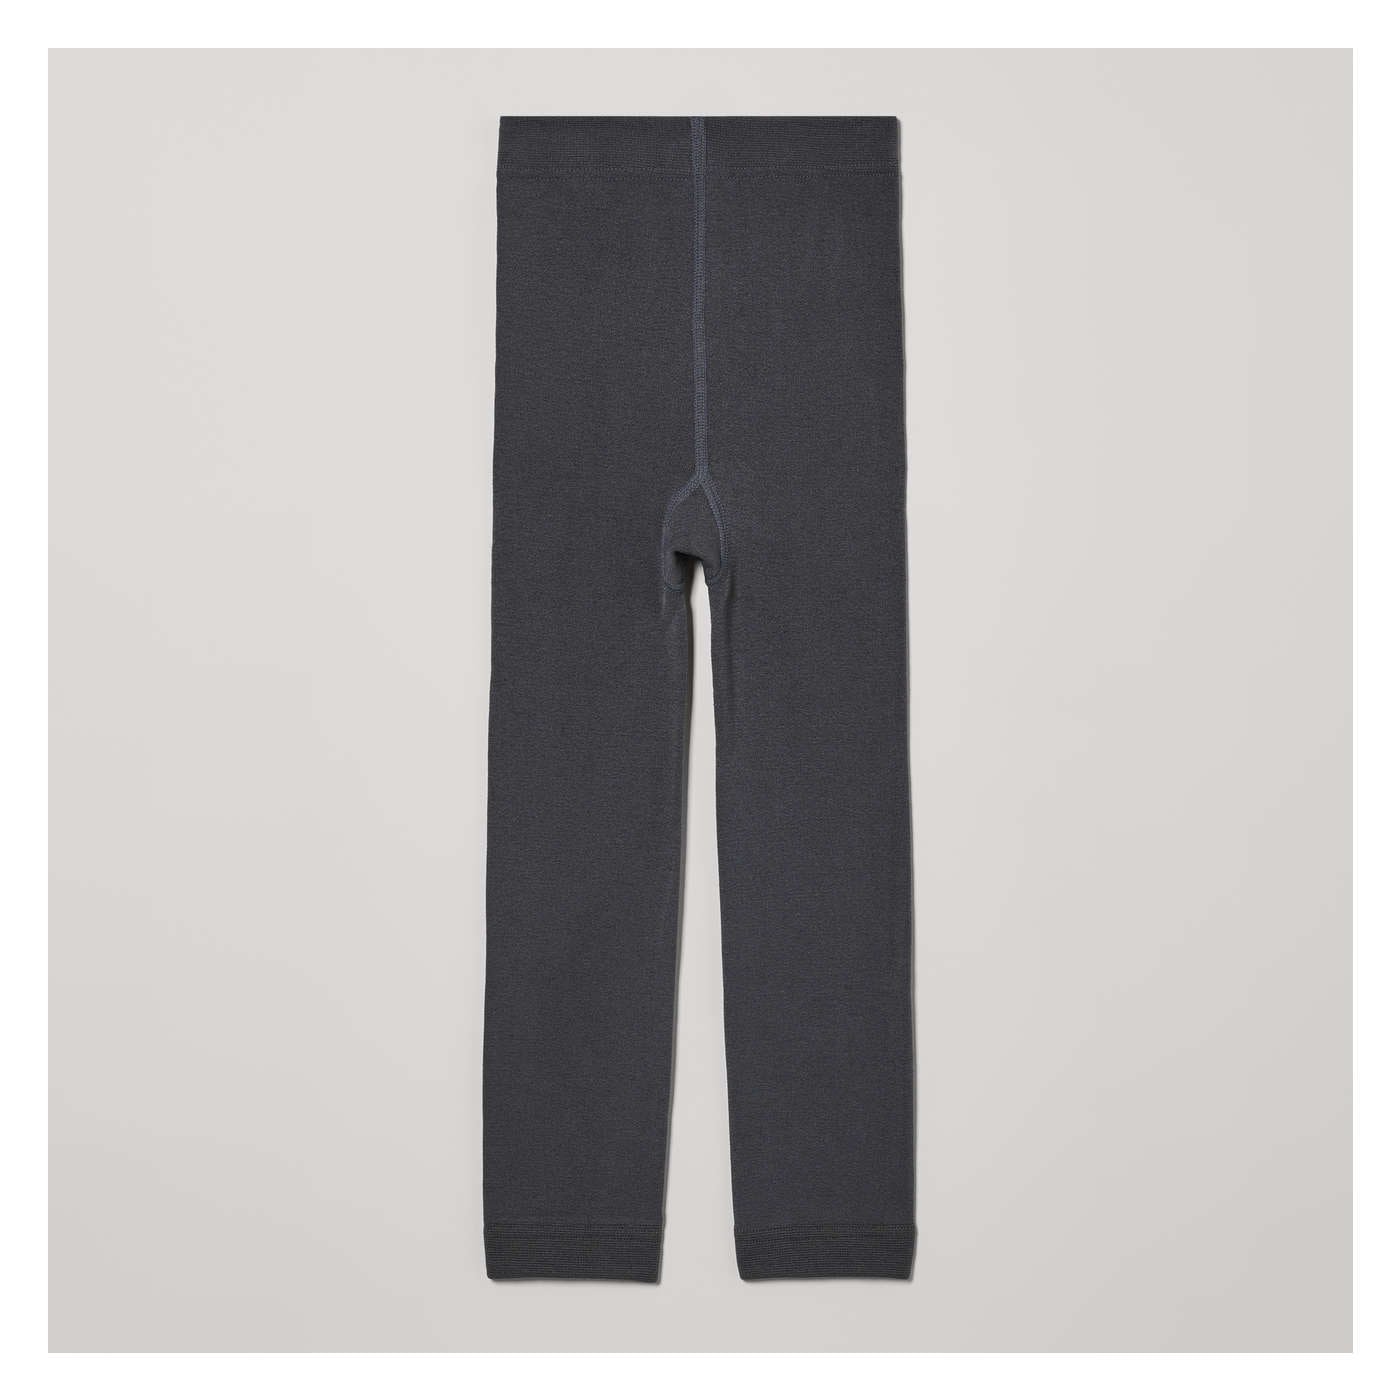 Toddler Girls' Fleece Tights in Charcoal from Joe Fresh